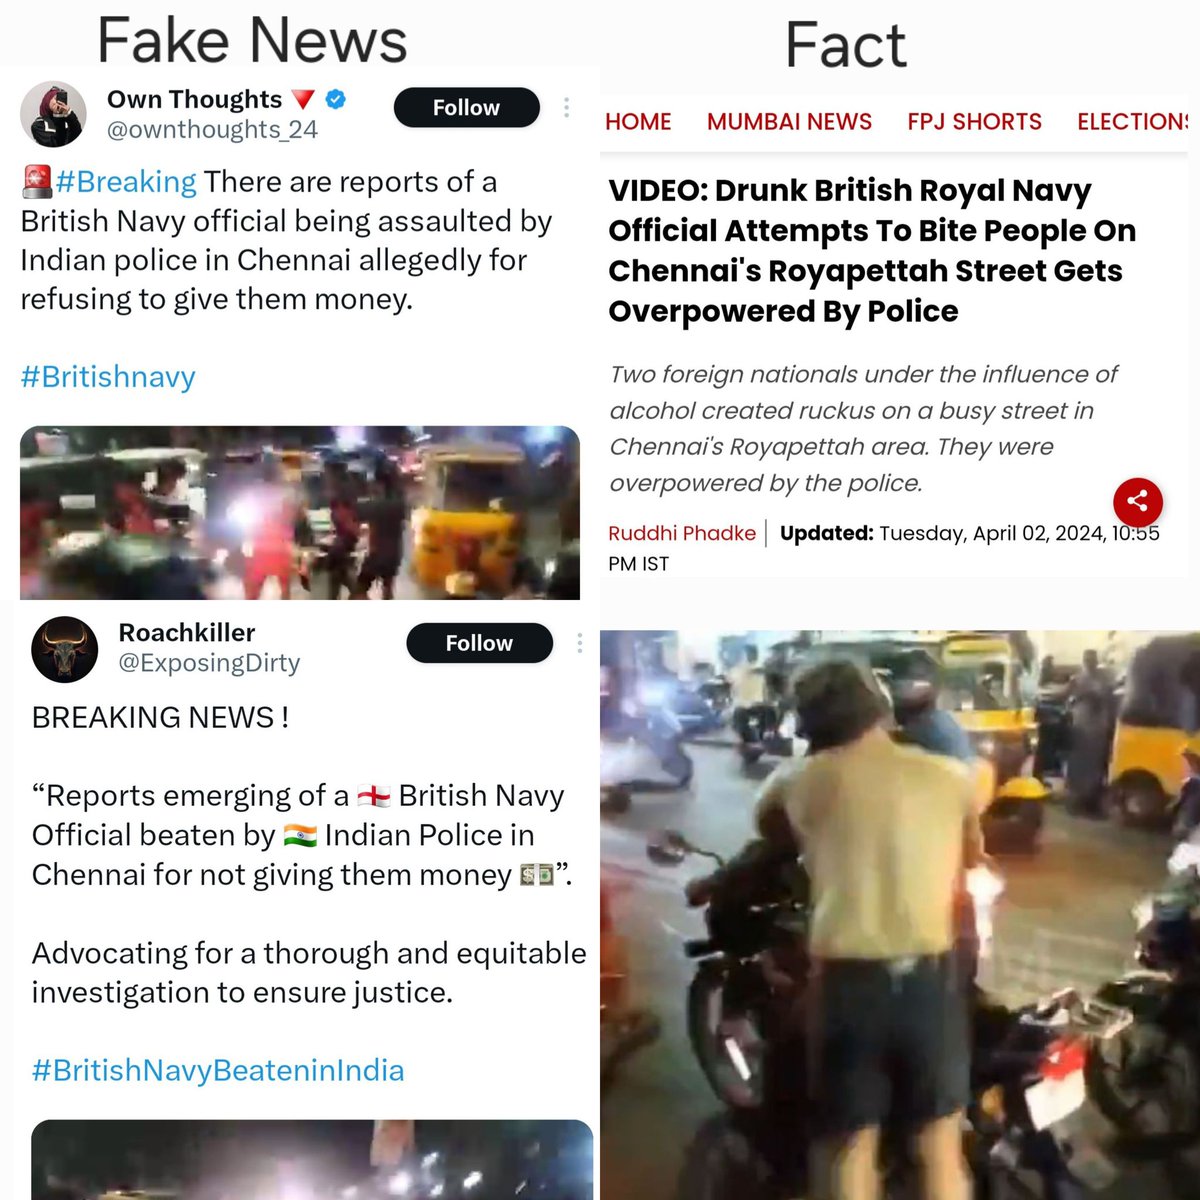 Anti-India lobby is now posting a video with a claim that British Navy Official assaulted by Tamil Nadu police in Chennai for not giving them money. This is fake news. Fact is that a drunk foreign national was biting people on the road in Chennai. Tamil Nadu police detained him